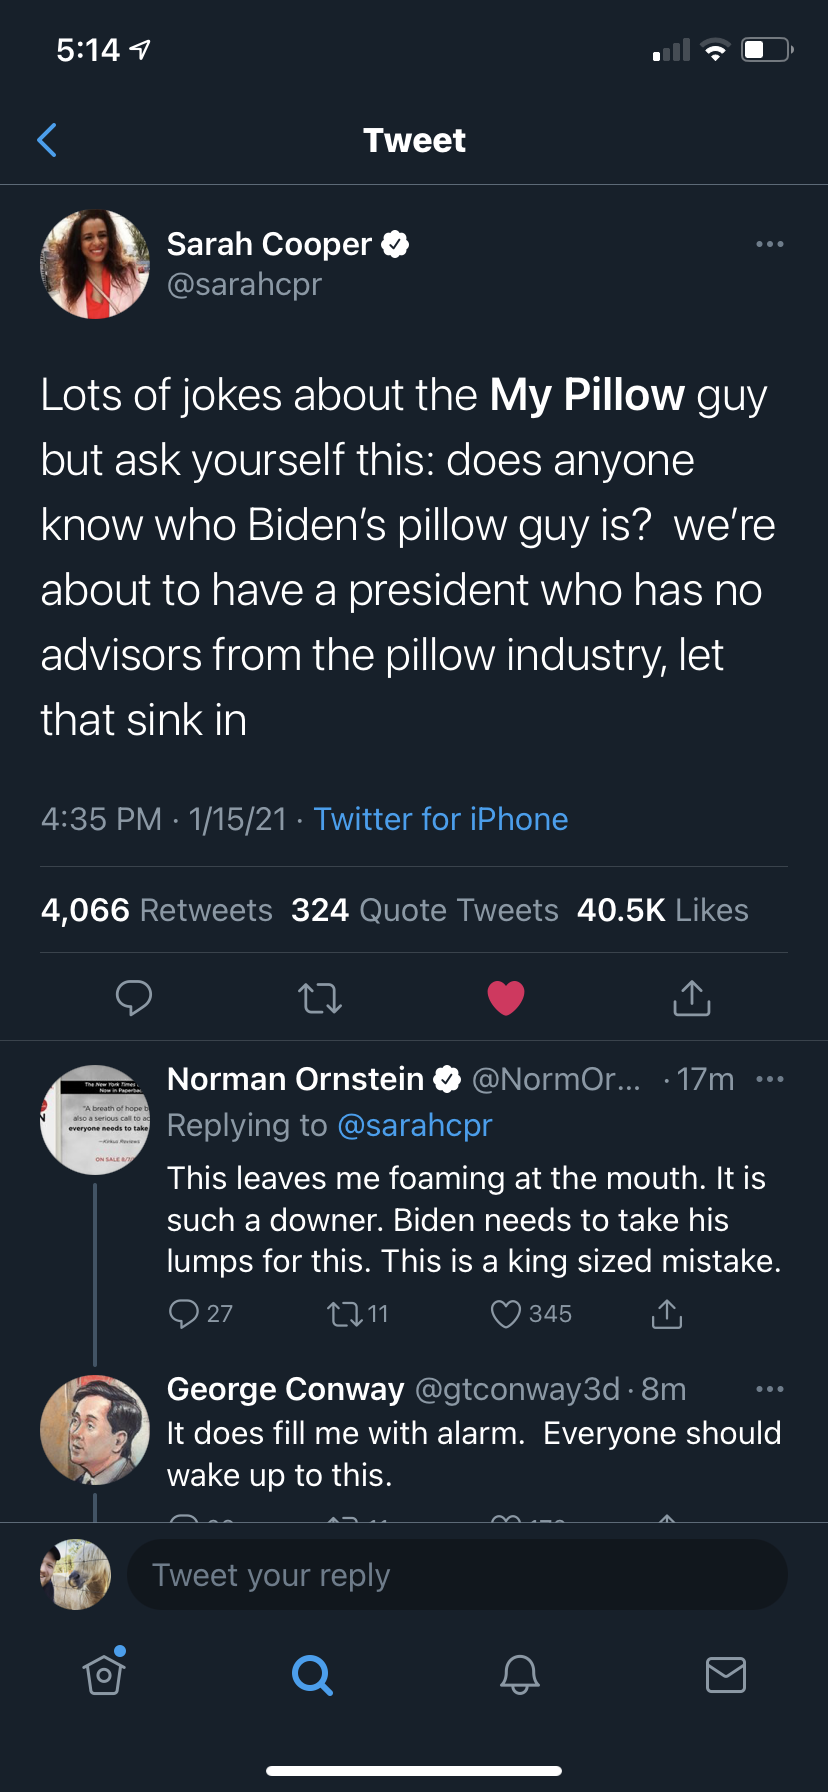 screenshot - Tweet Sarah Cooper Lots of jokes about the My Pillow guy but ask yourself this does anyone know who Biden's pillow guy is? we're about to have a president who has no advisors from the pillow industry, let that sink in 11521 Twitter for iPhone